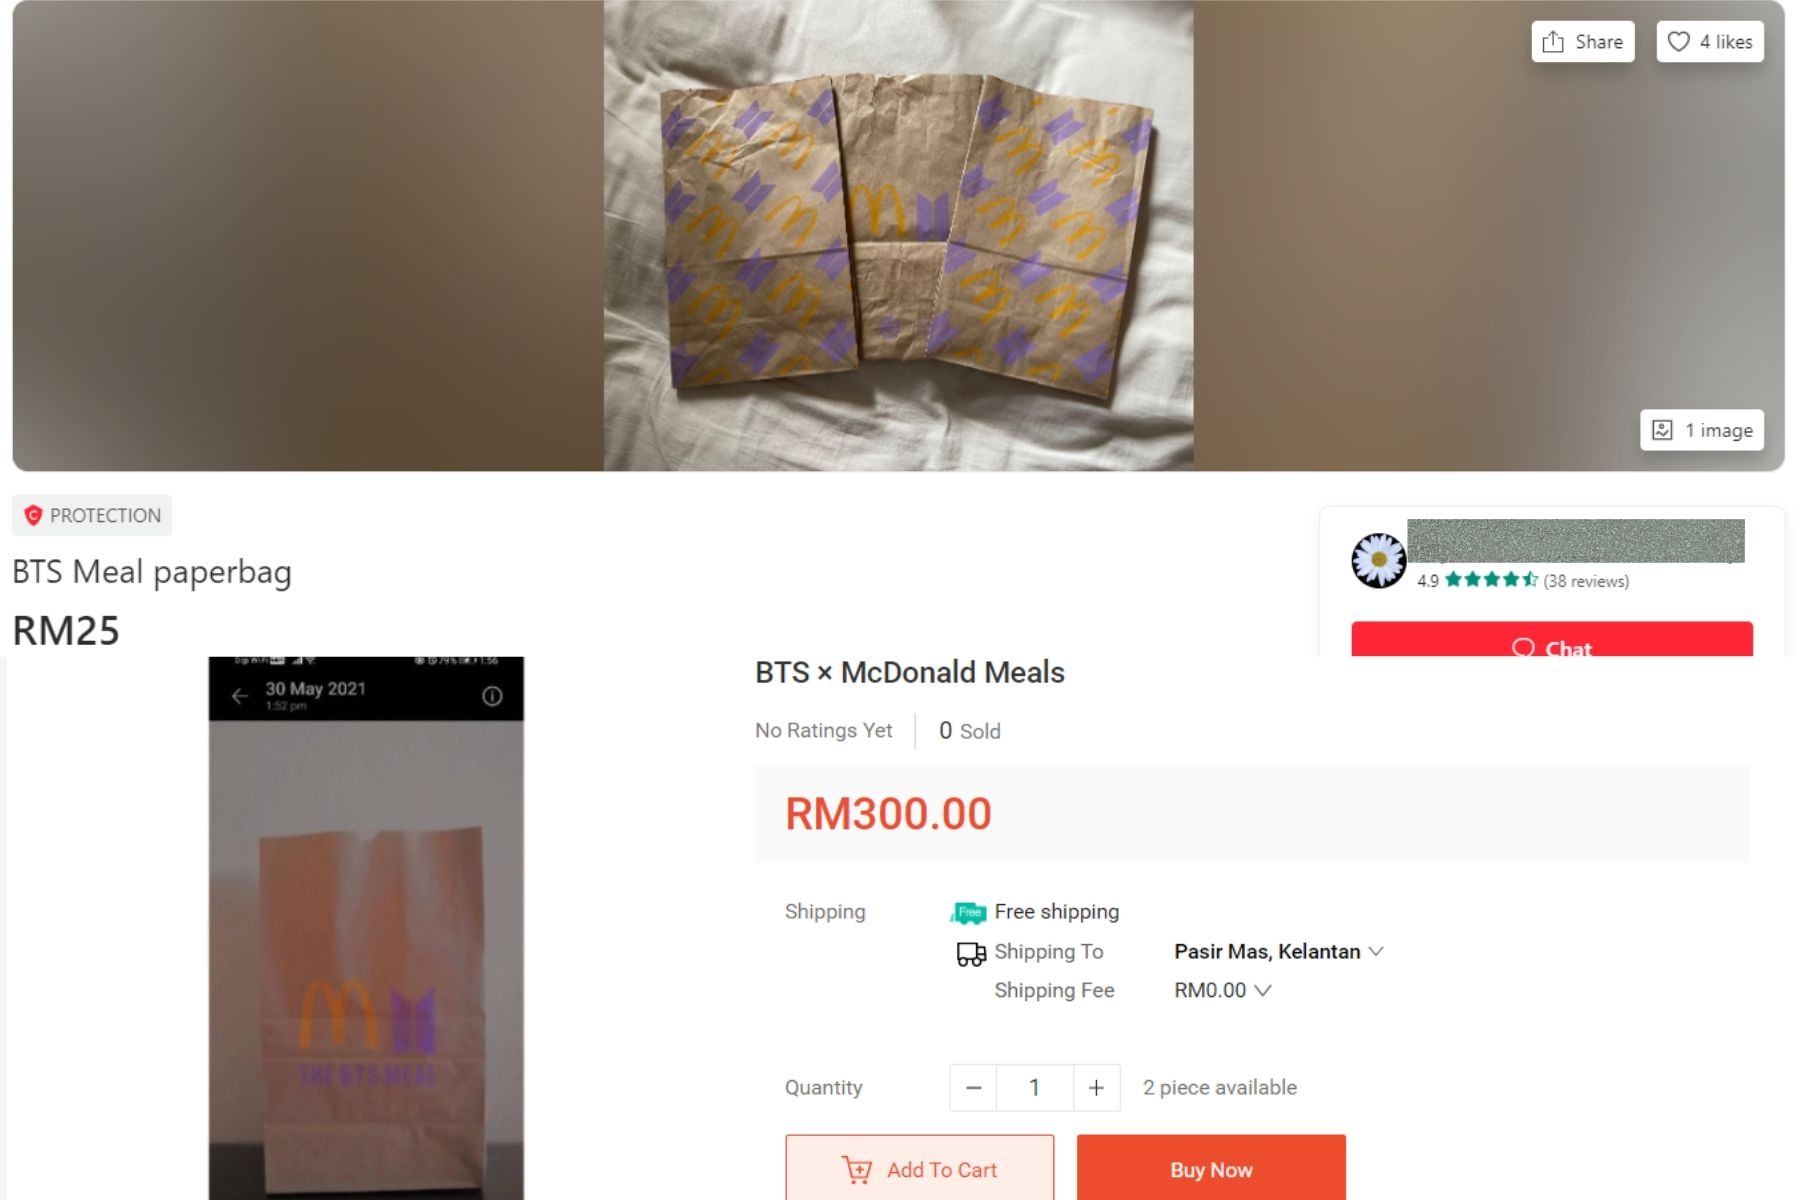 Local sellers were already reselling the empty packaging of the meal set on several online shopping platforms a day after the launch.